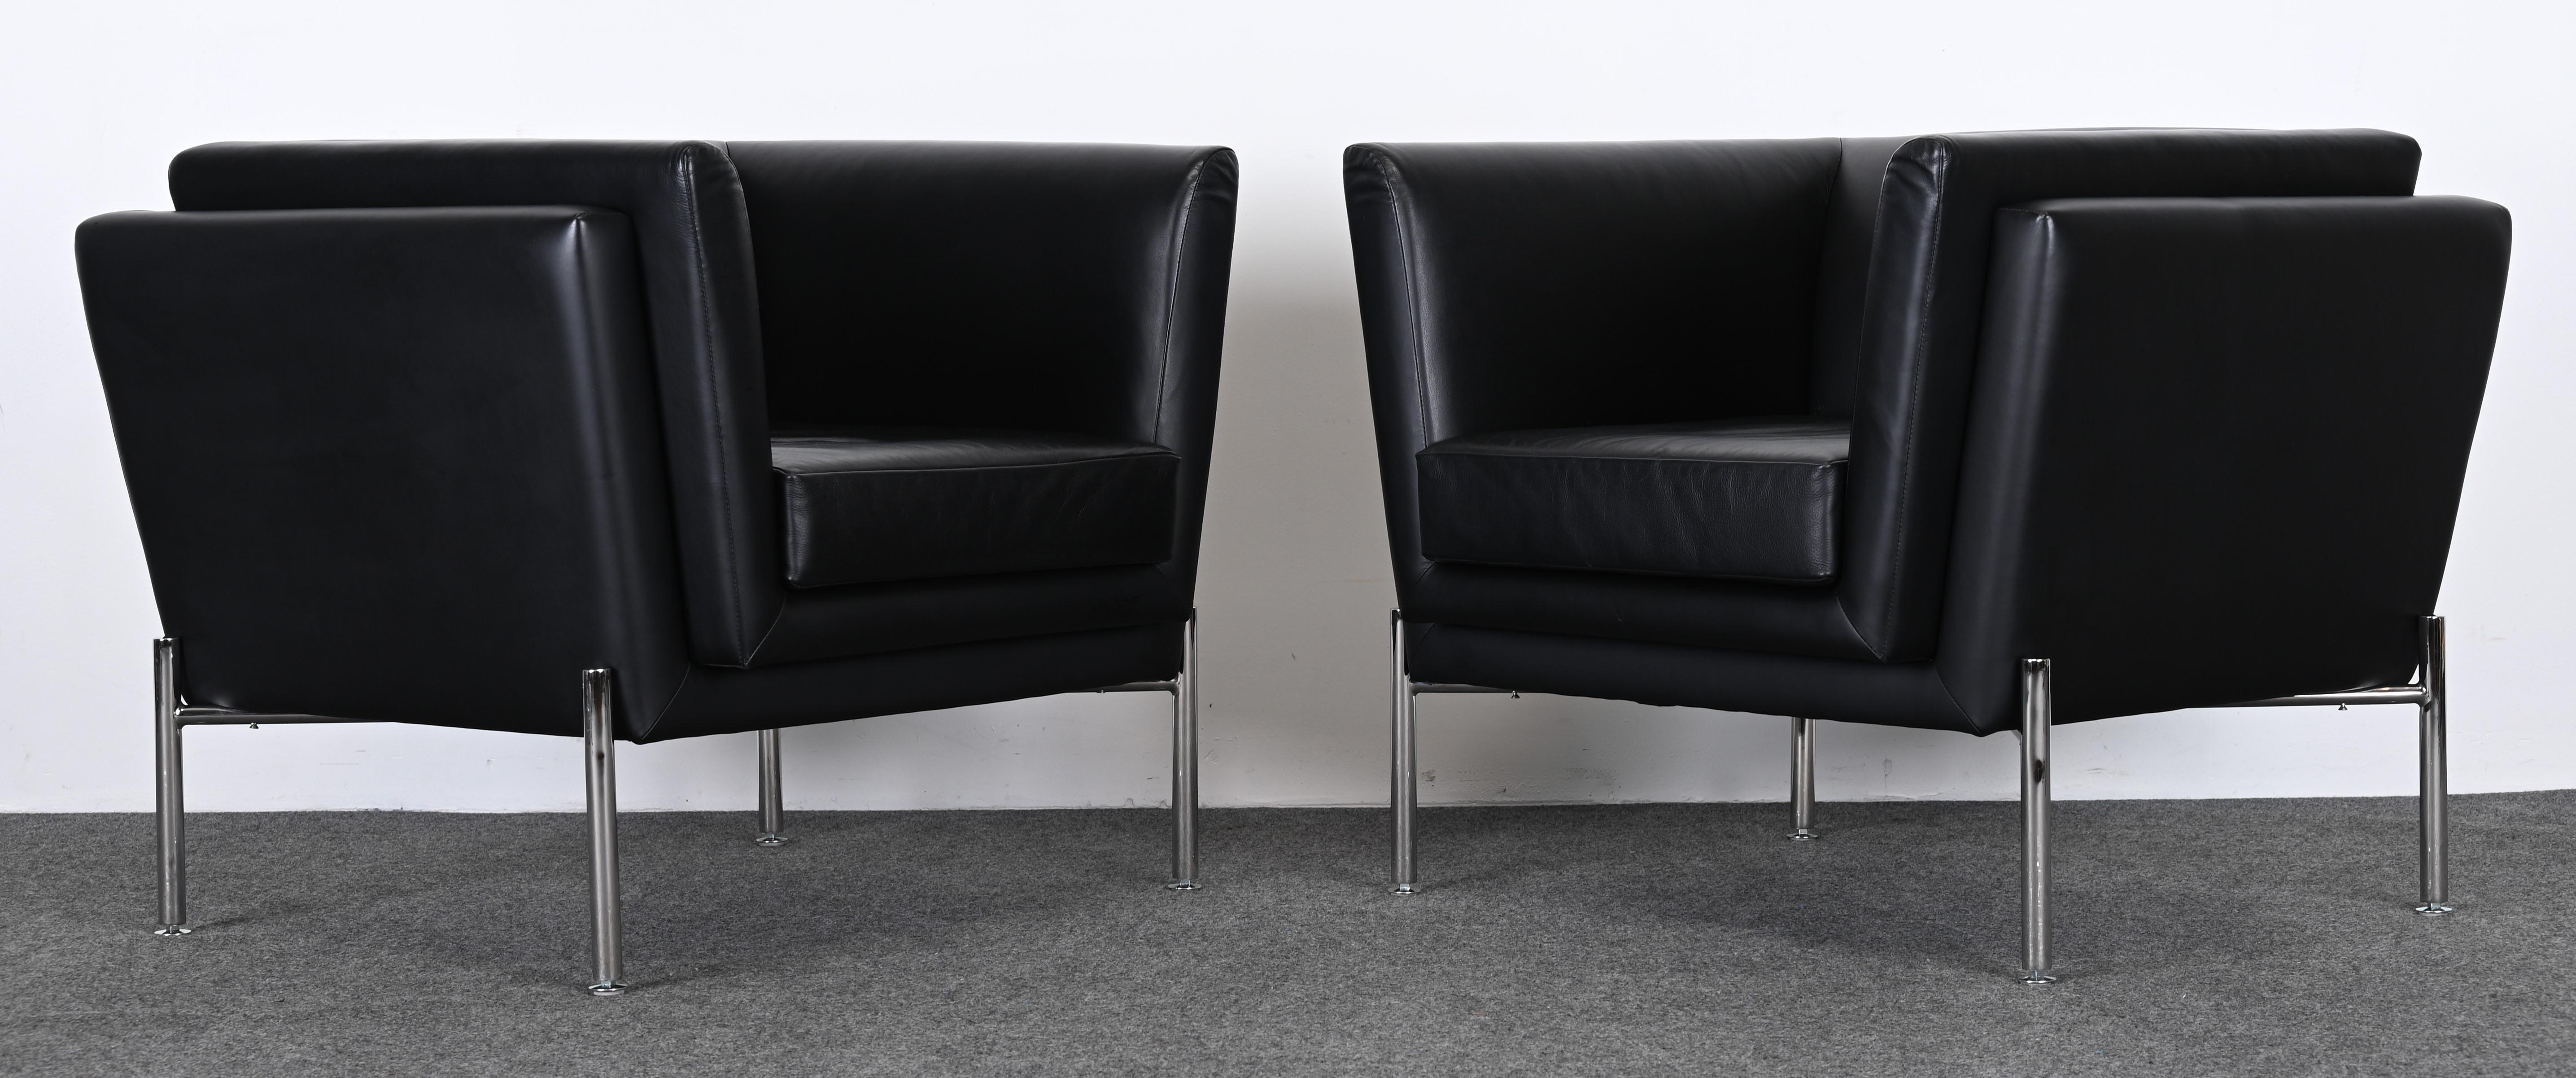 Pair of Leather and Stainless Steel Lounge Chairs by Brueton, 20th Century In Good Condition For Sale In Hamburg, PA